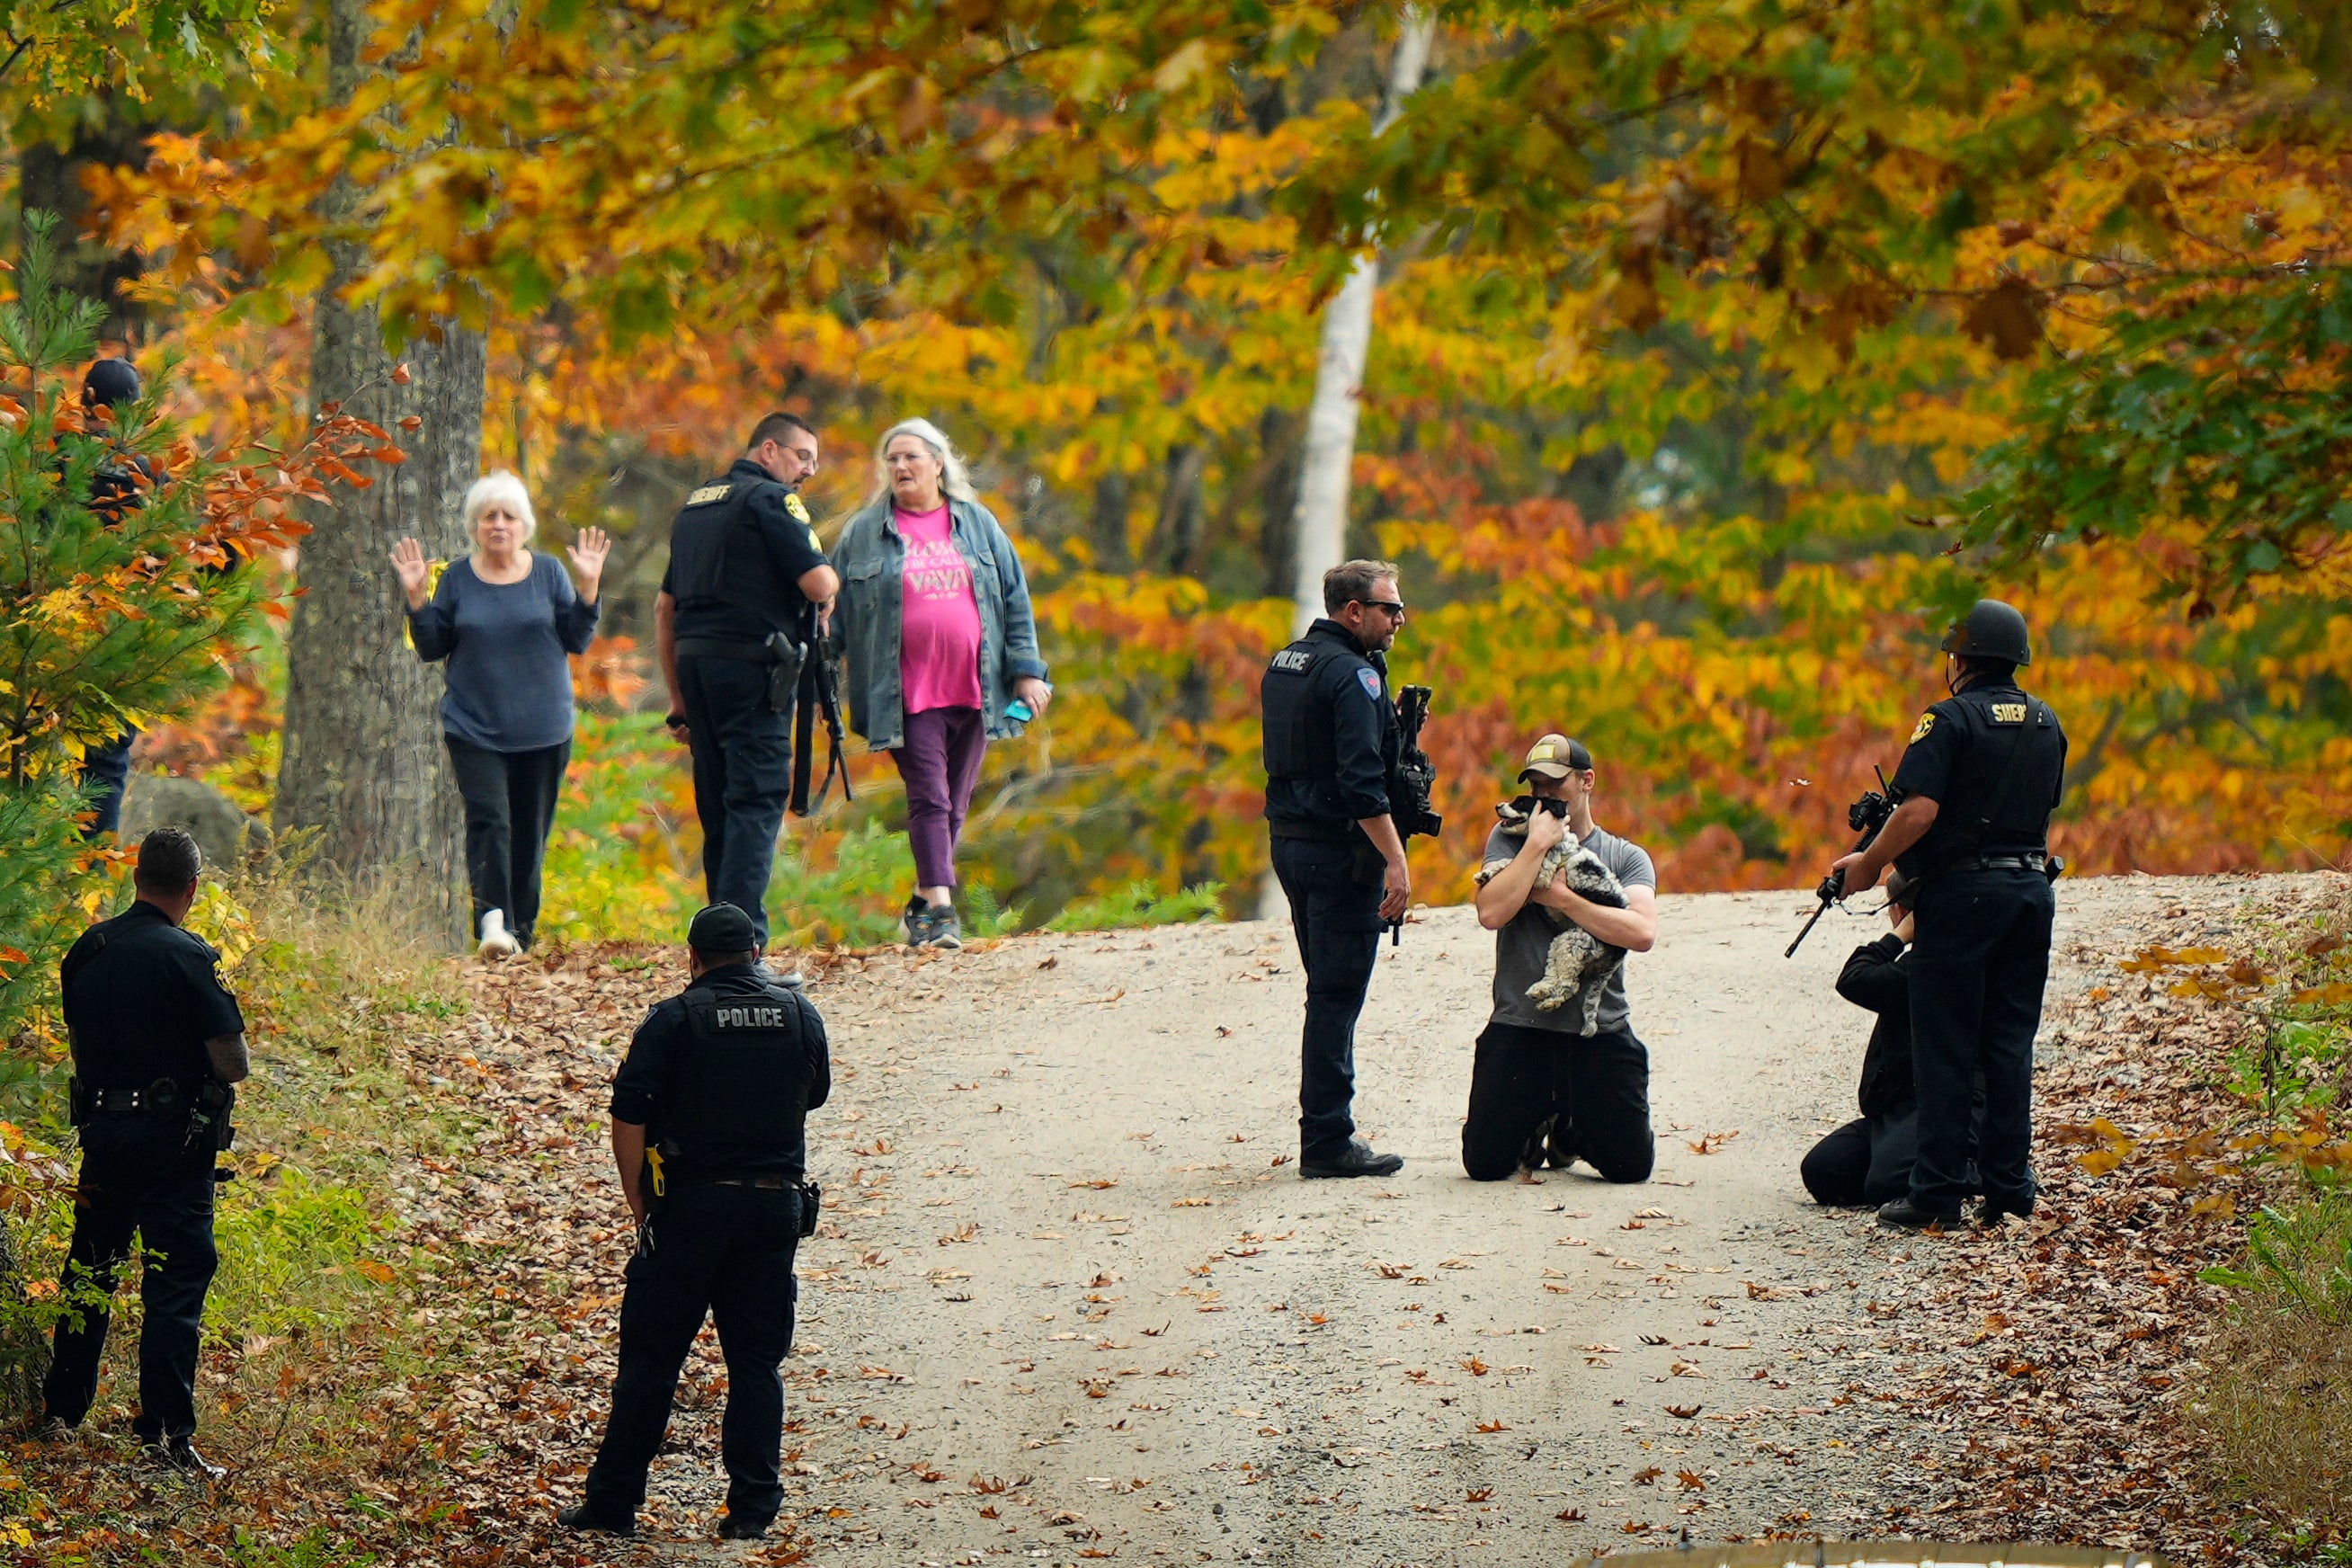 Police temporarily detain residents on Friday as they hunt for the suspect in Wednesday’s mass shooting in Maine, USA